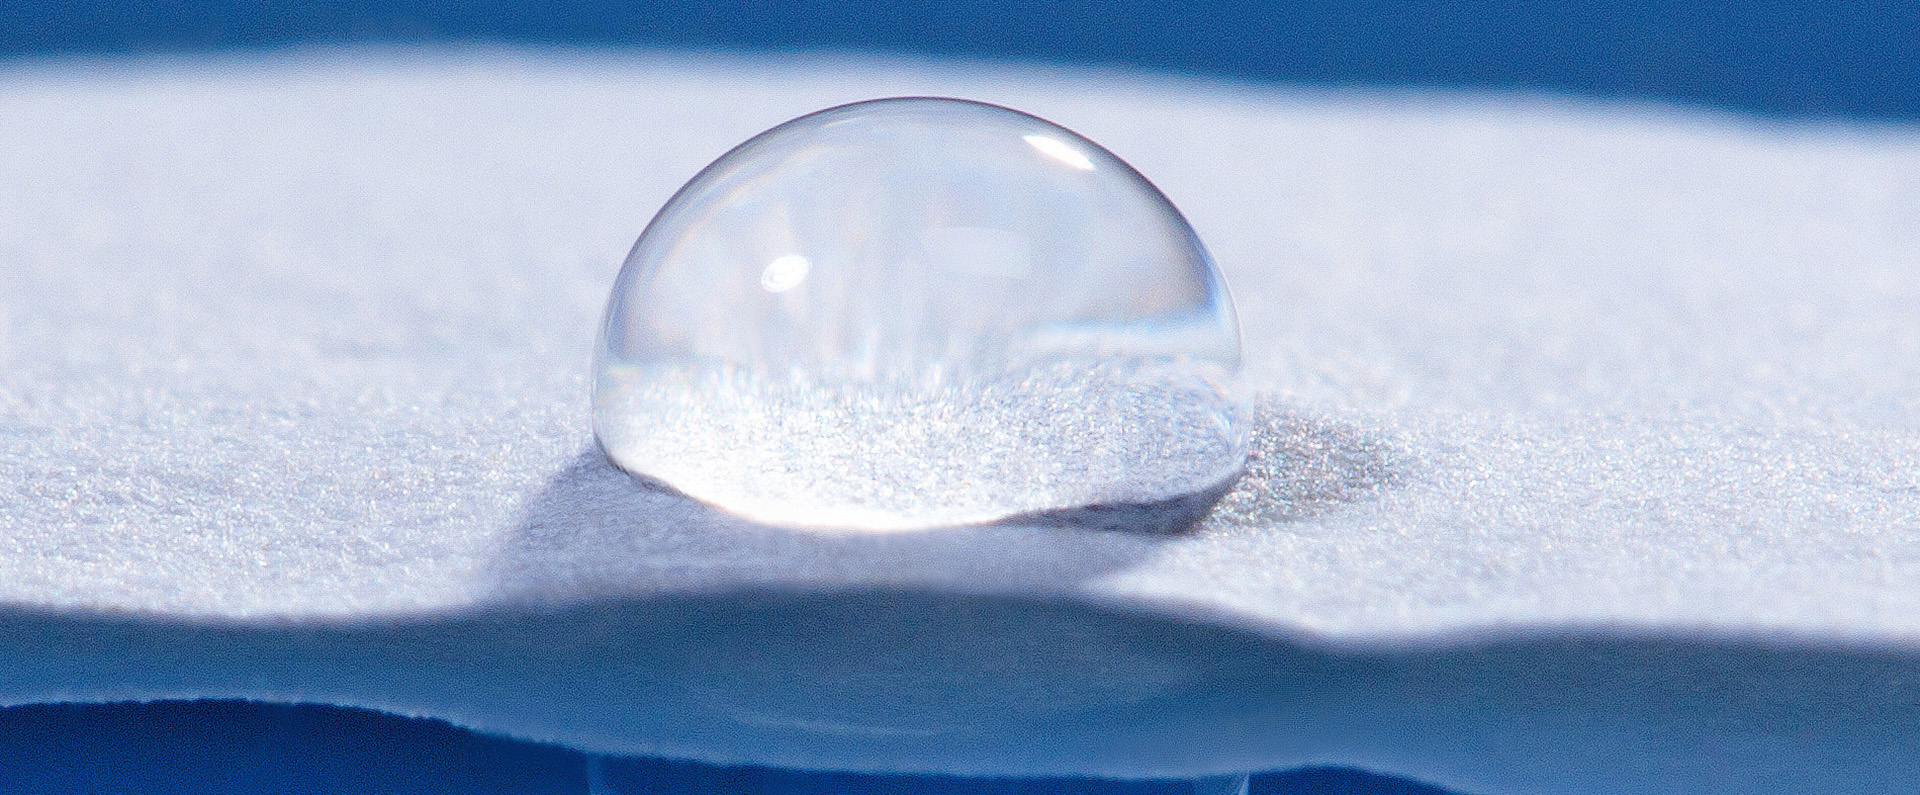 A drop of water on paper with water resistant starch-based coating.